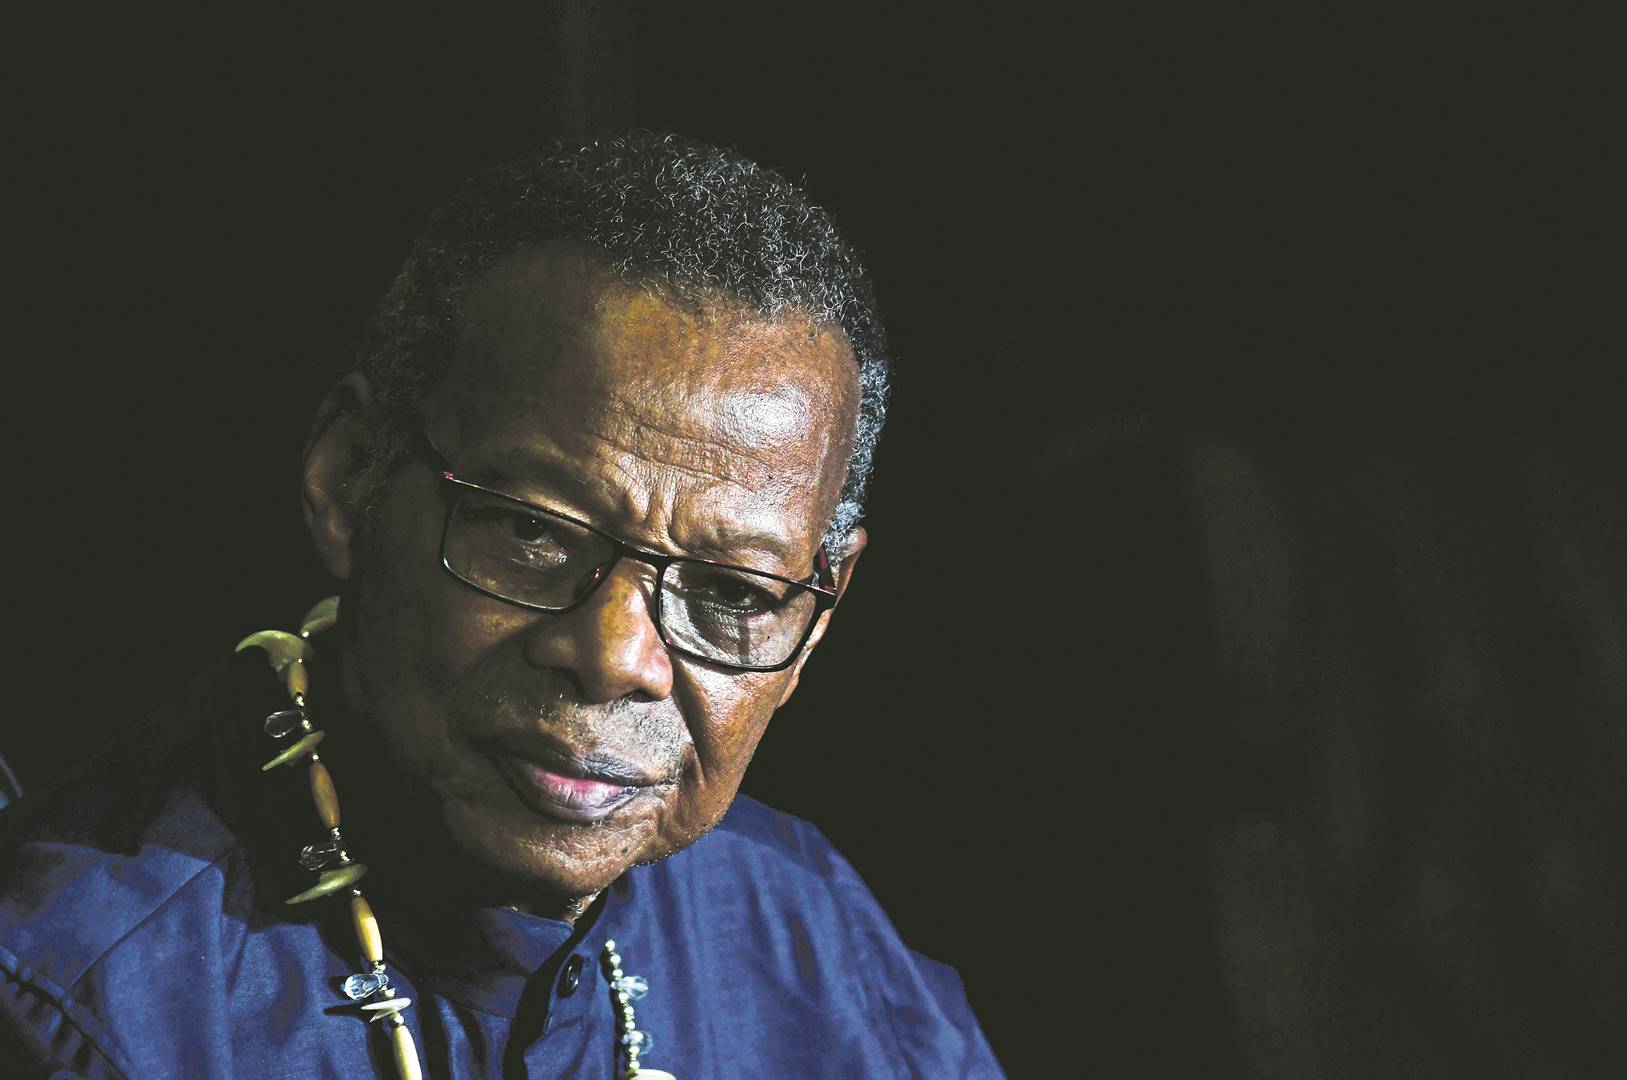 Thanks to the strategic wisdom and democratic leadership of Prince Mangosuthu Buthelezi, the party he founded, the IFP, has continued to grow in strength, writes Velenkosini Hlabisa.